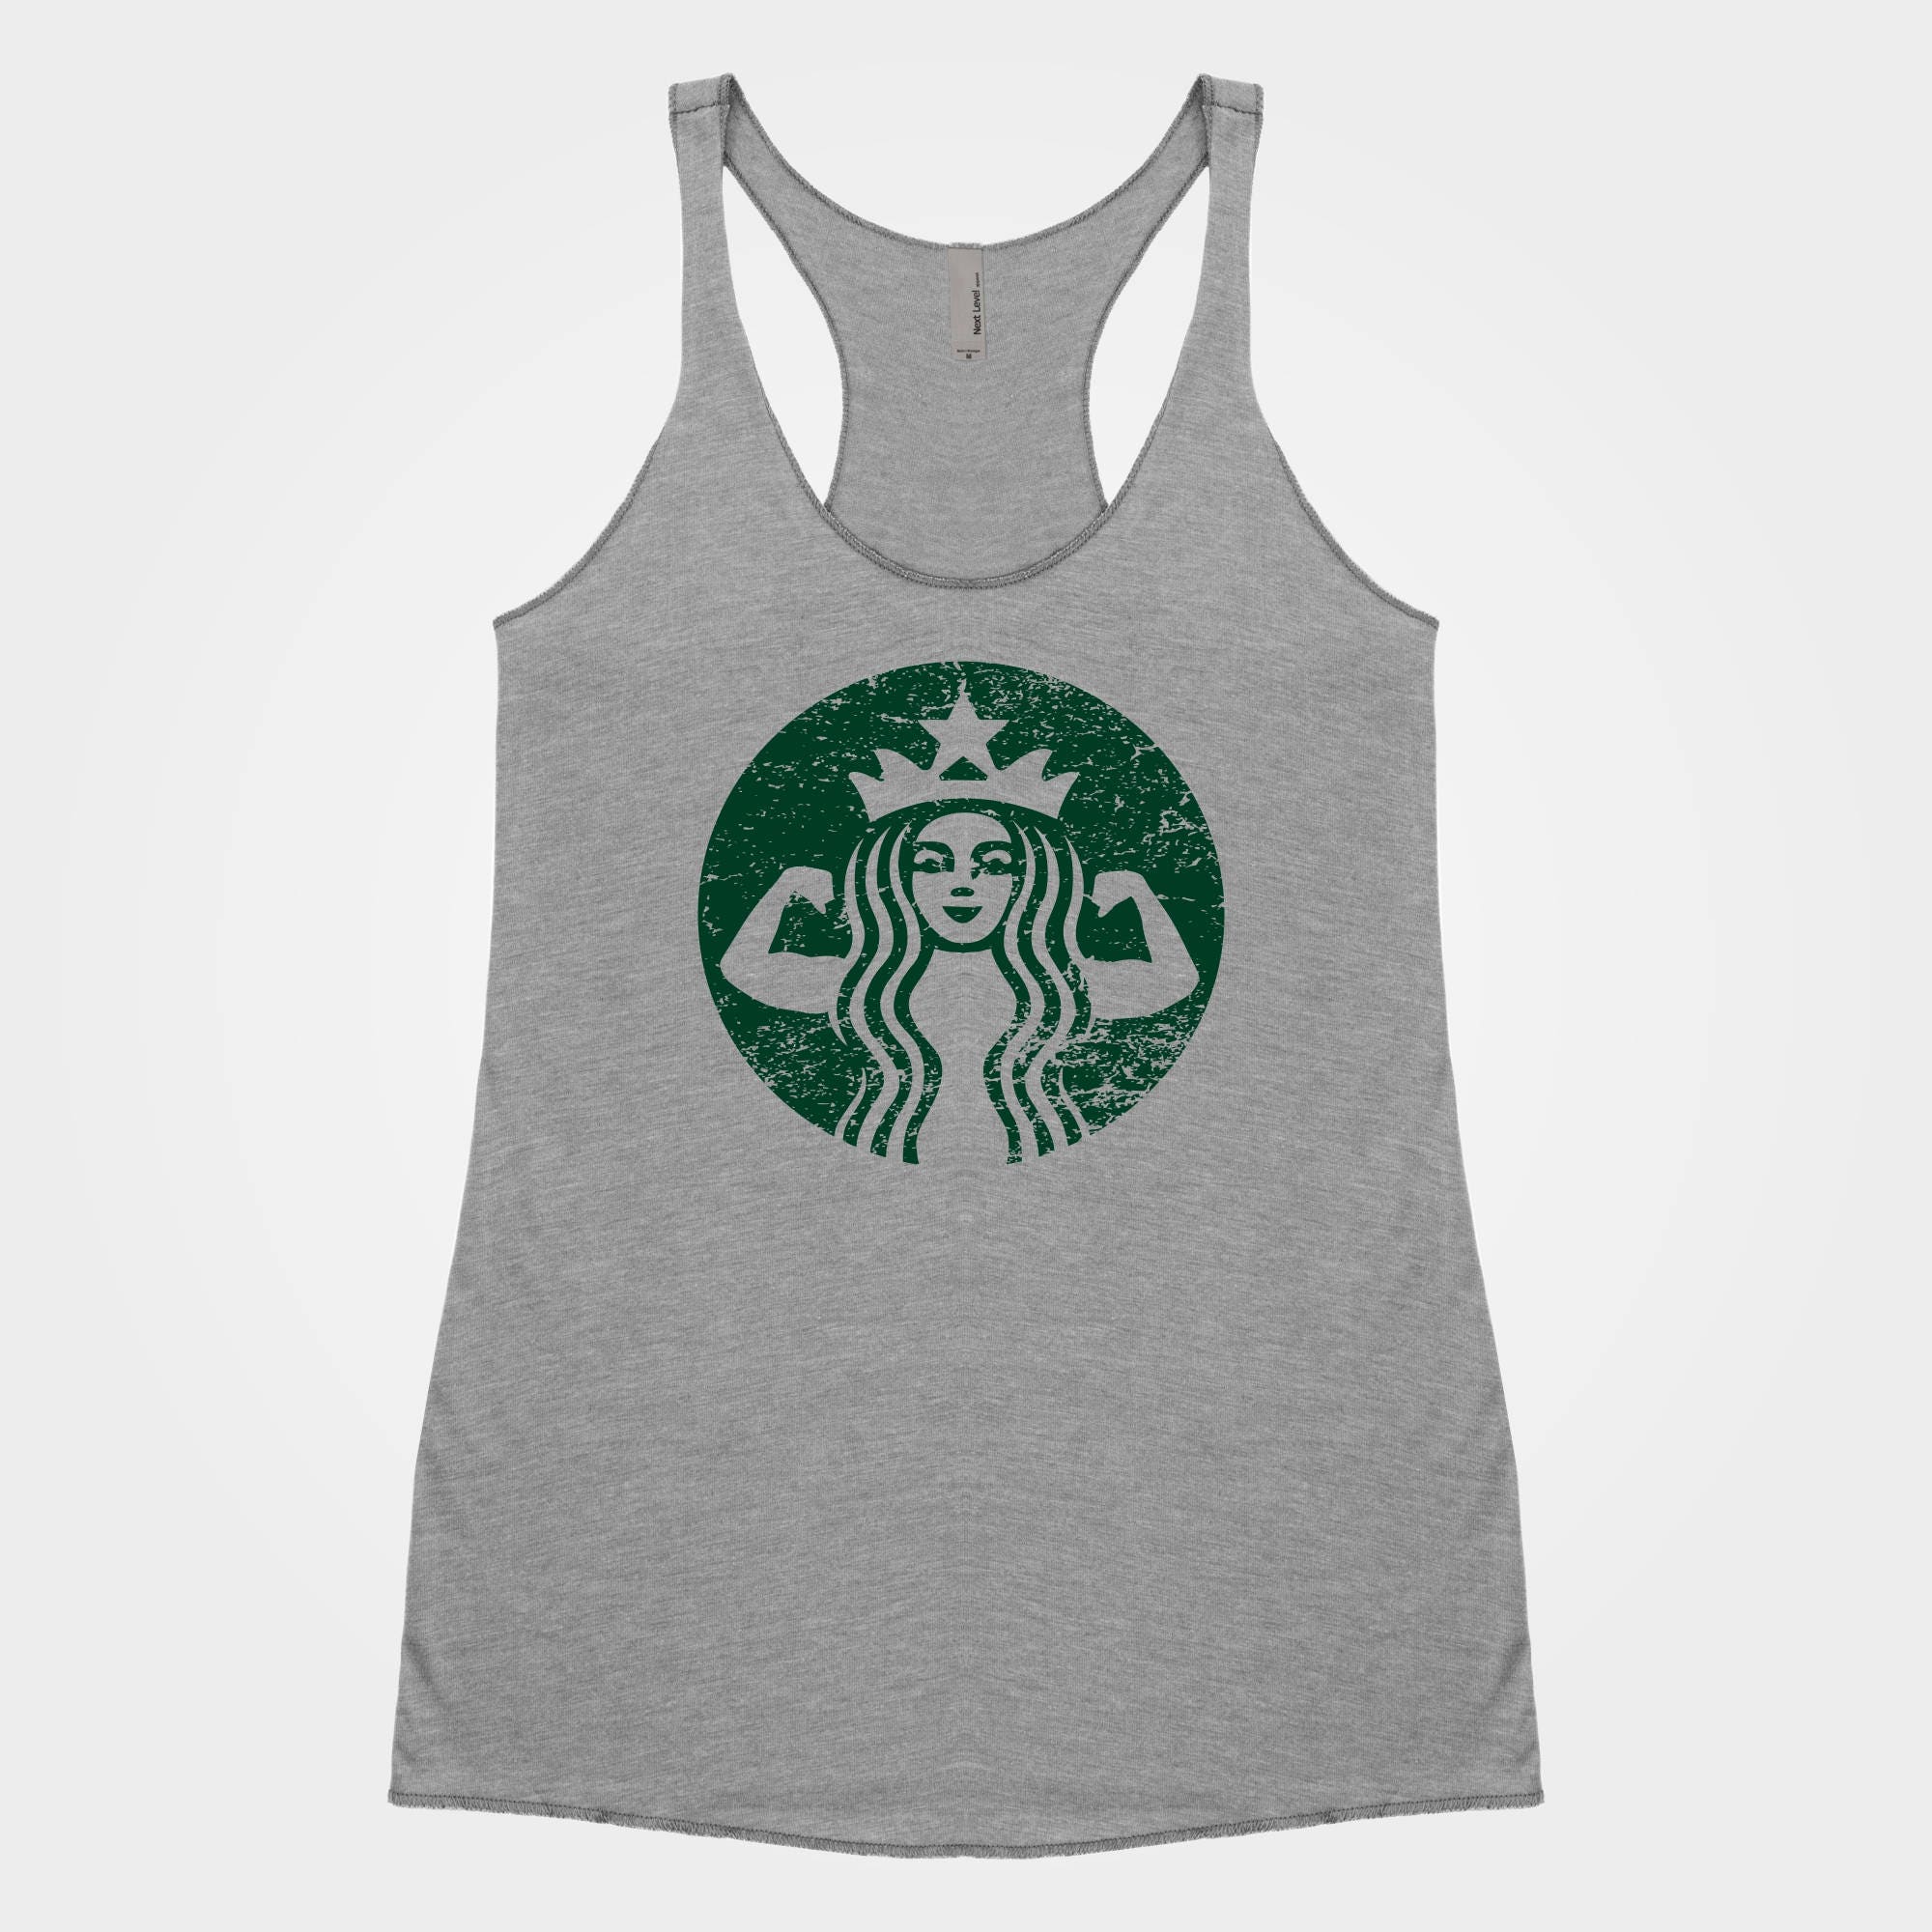 Simple Starbucks Workout Tank for Burn Fat fast